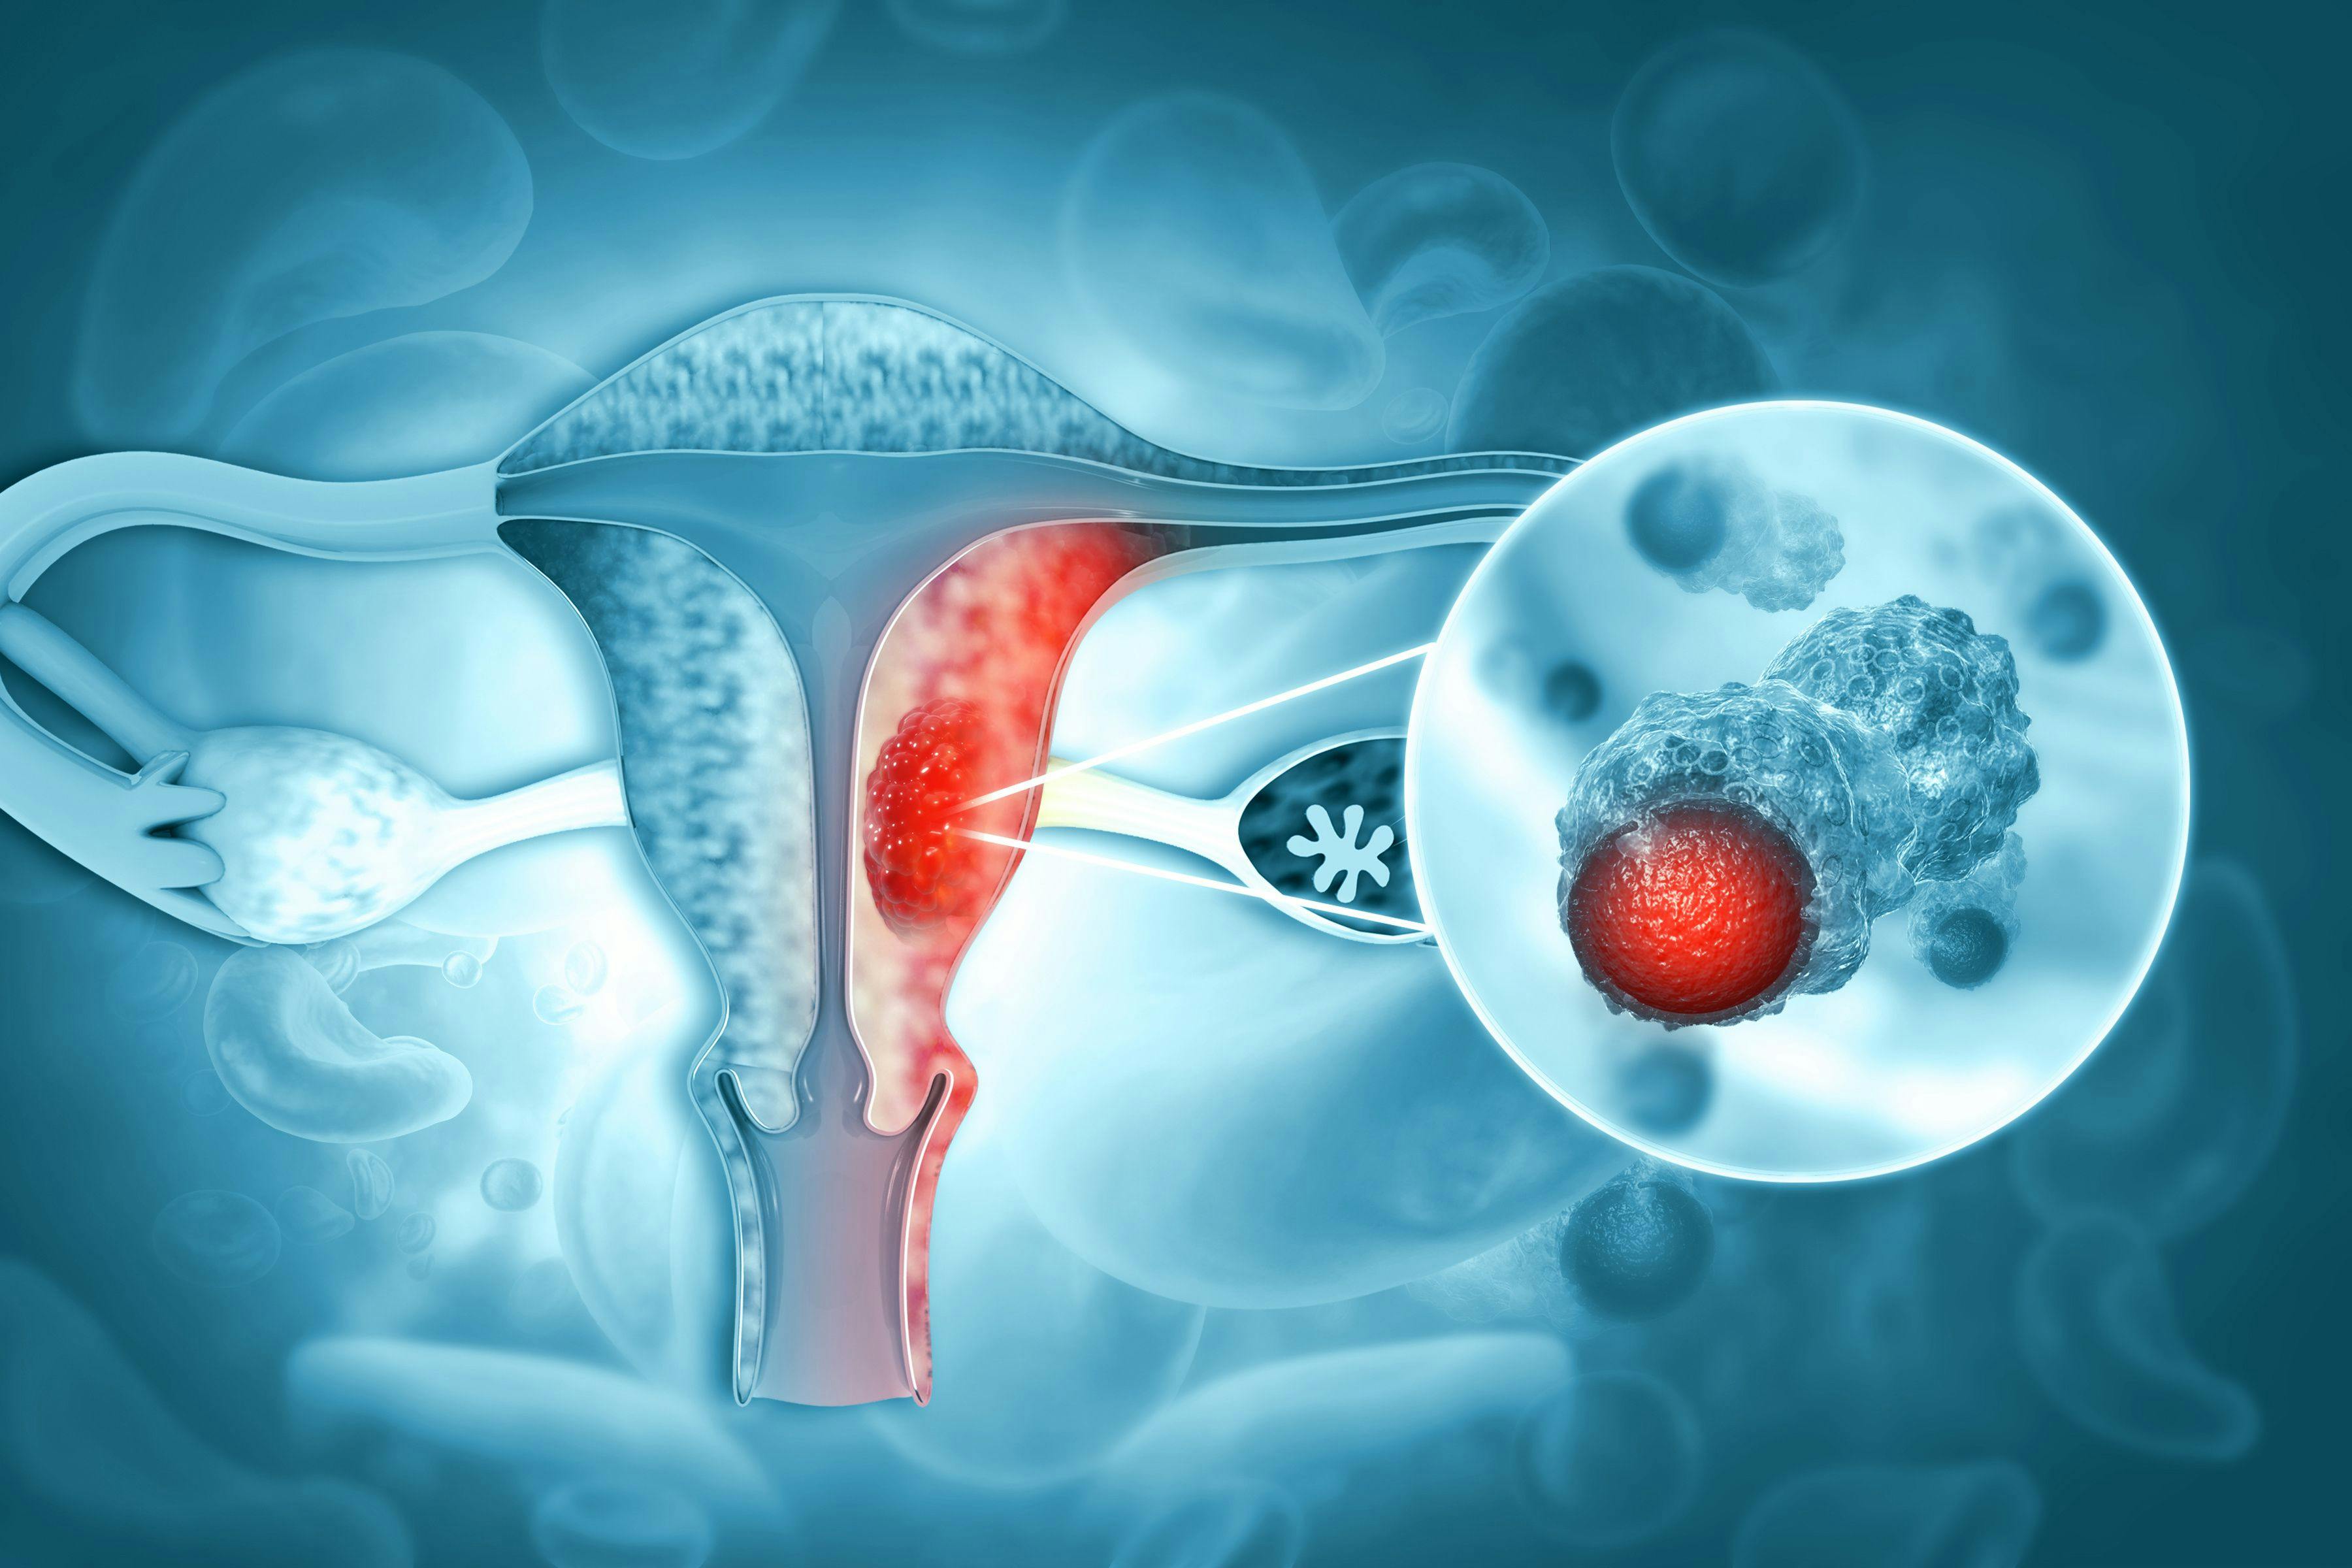 Female reproductive system diseases: ©Crystal Light - stock.adobe.com